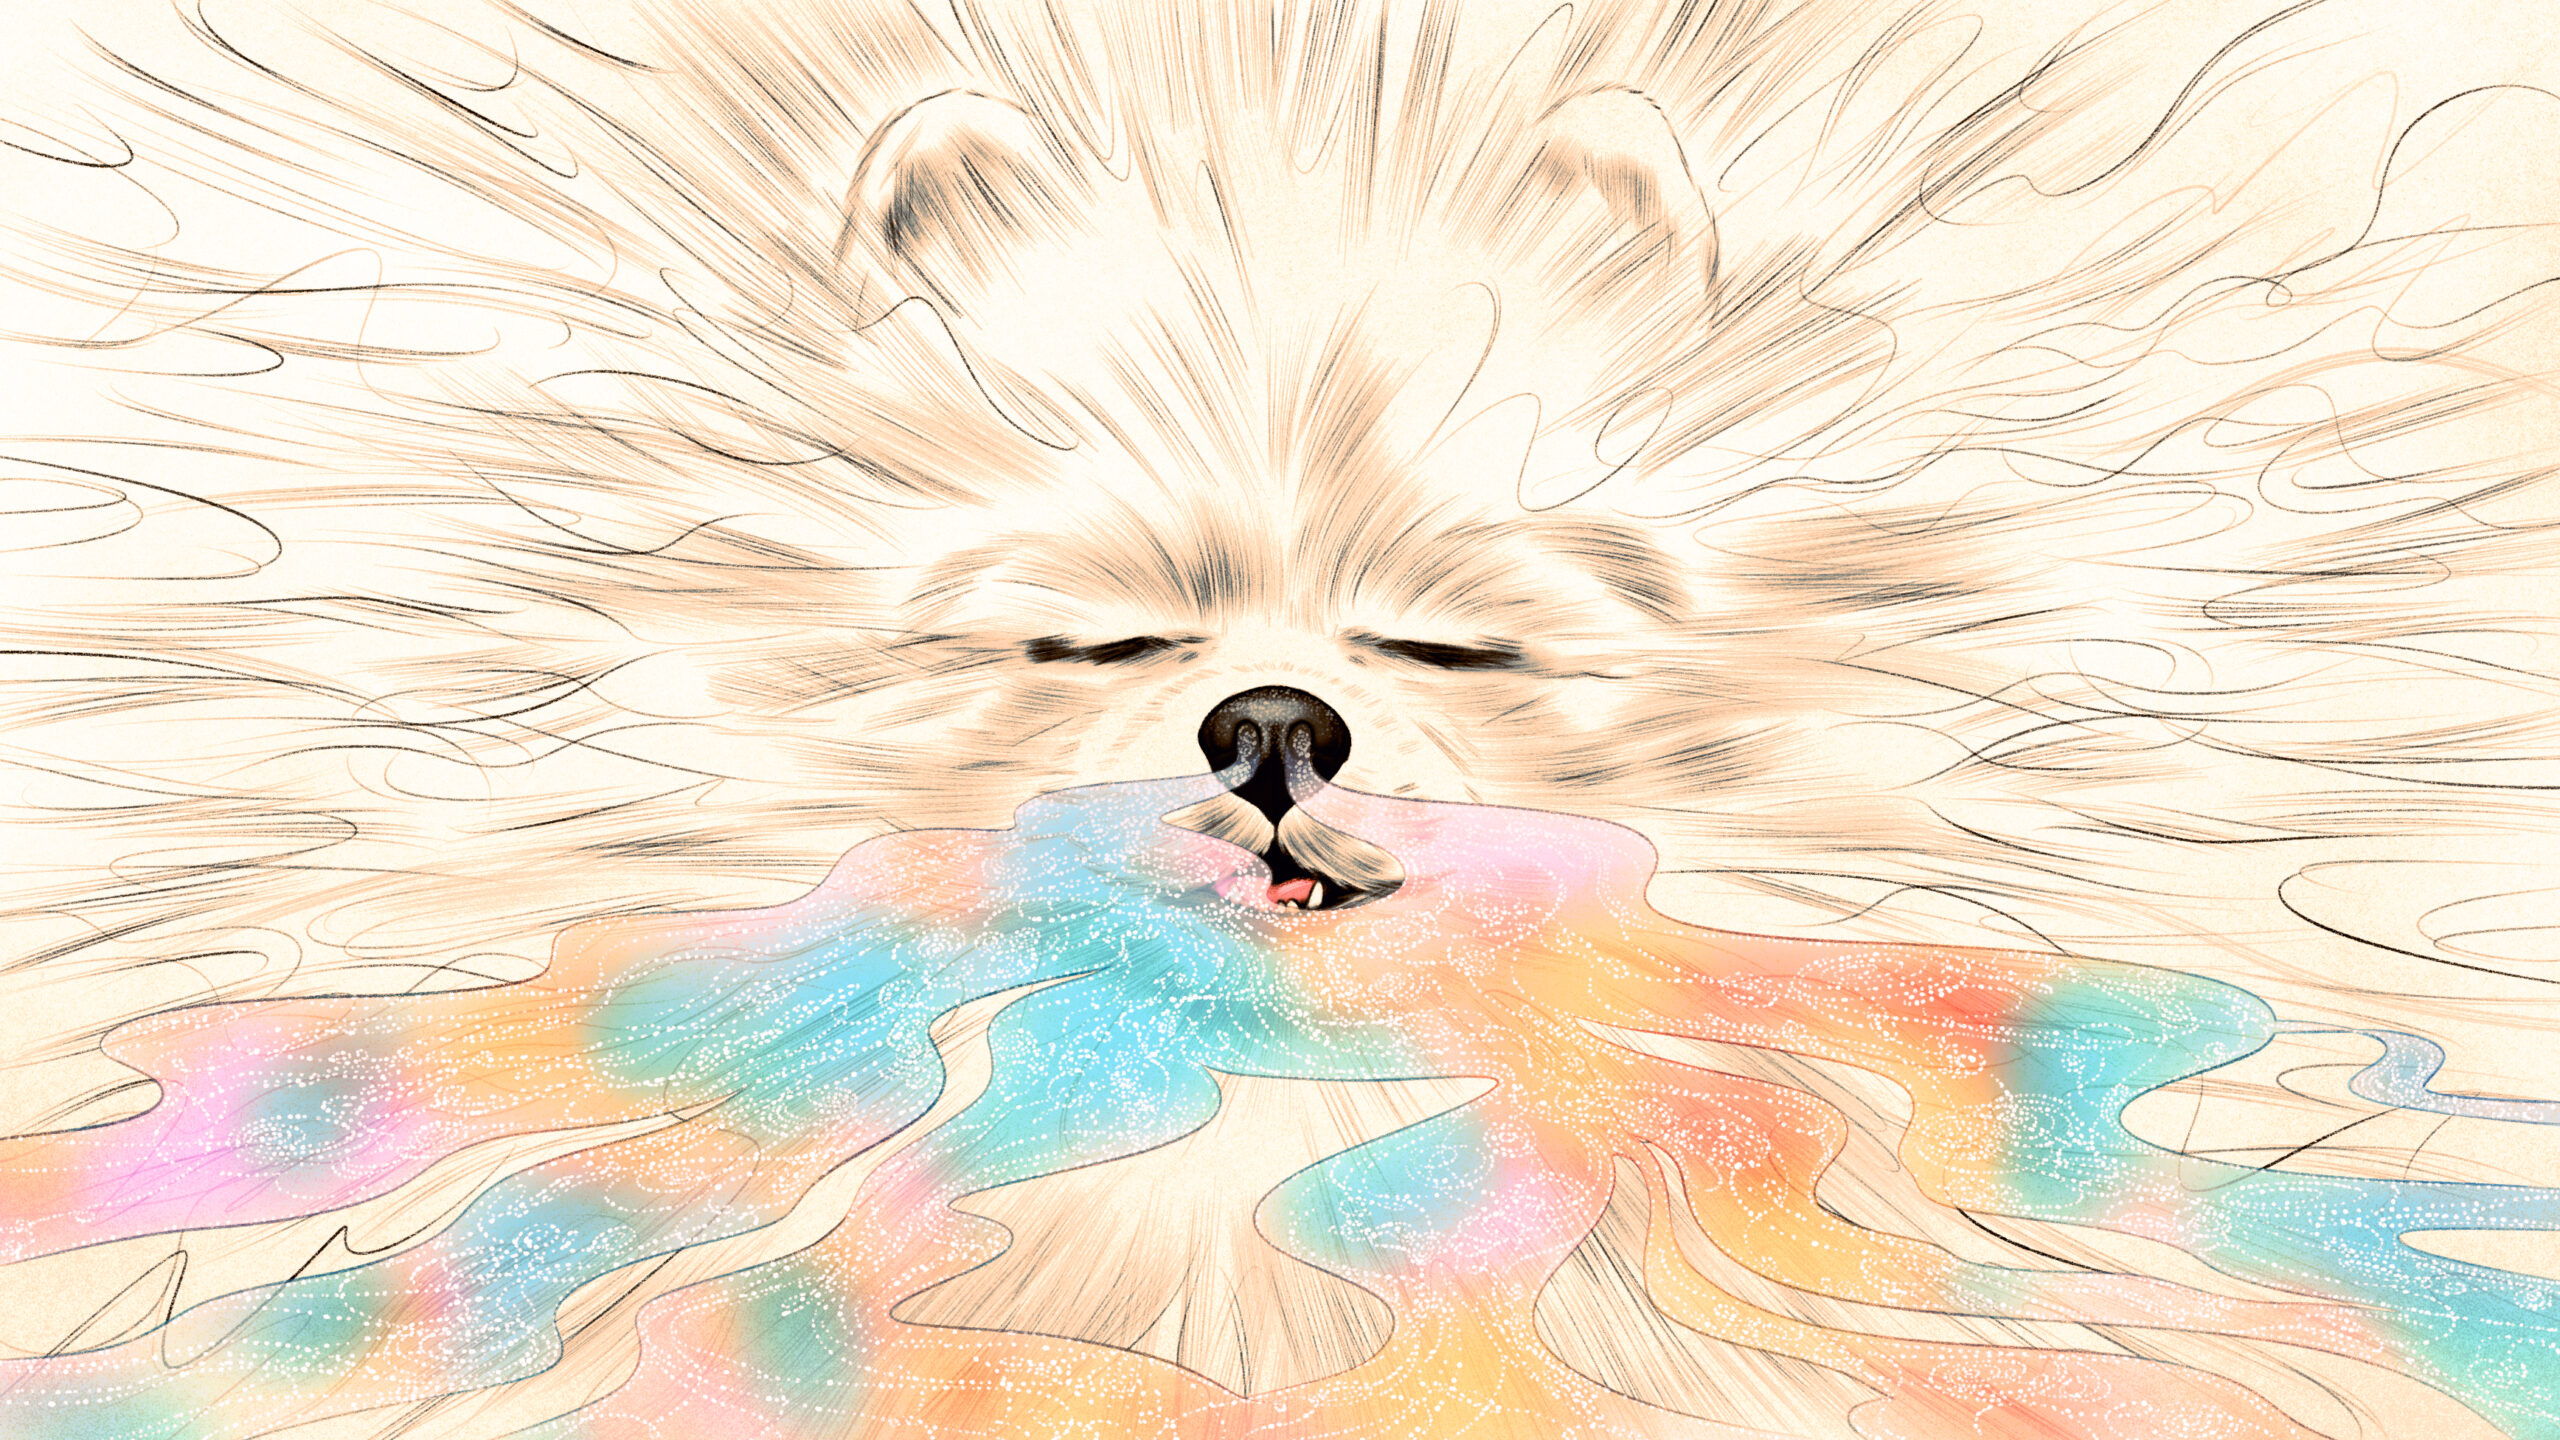 White dog inhaling colorful waves that represent smells. Illustrated.